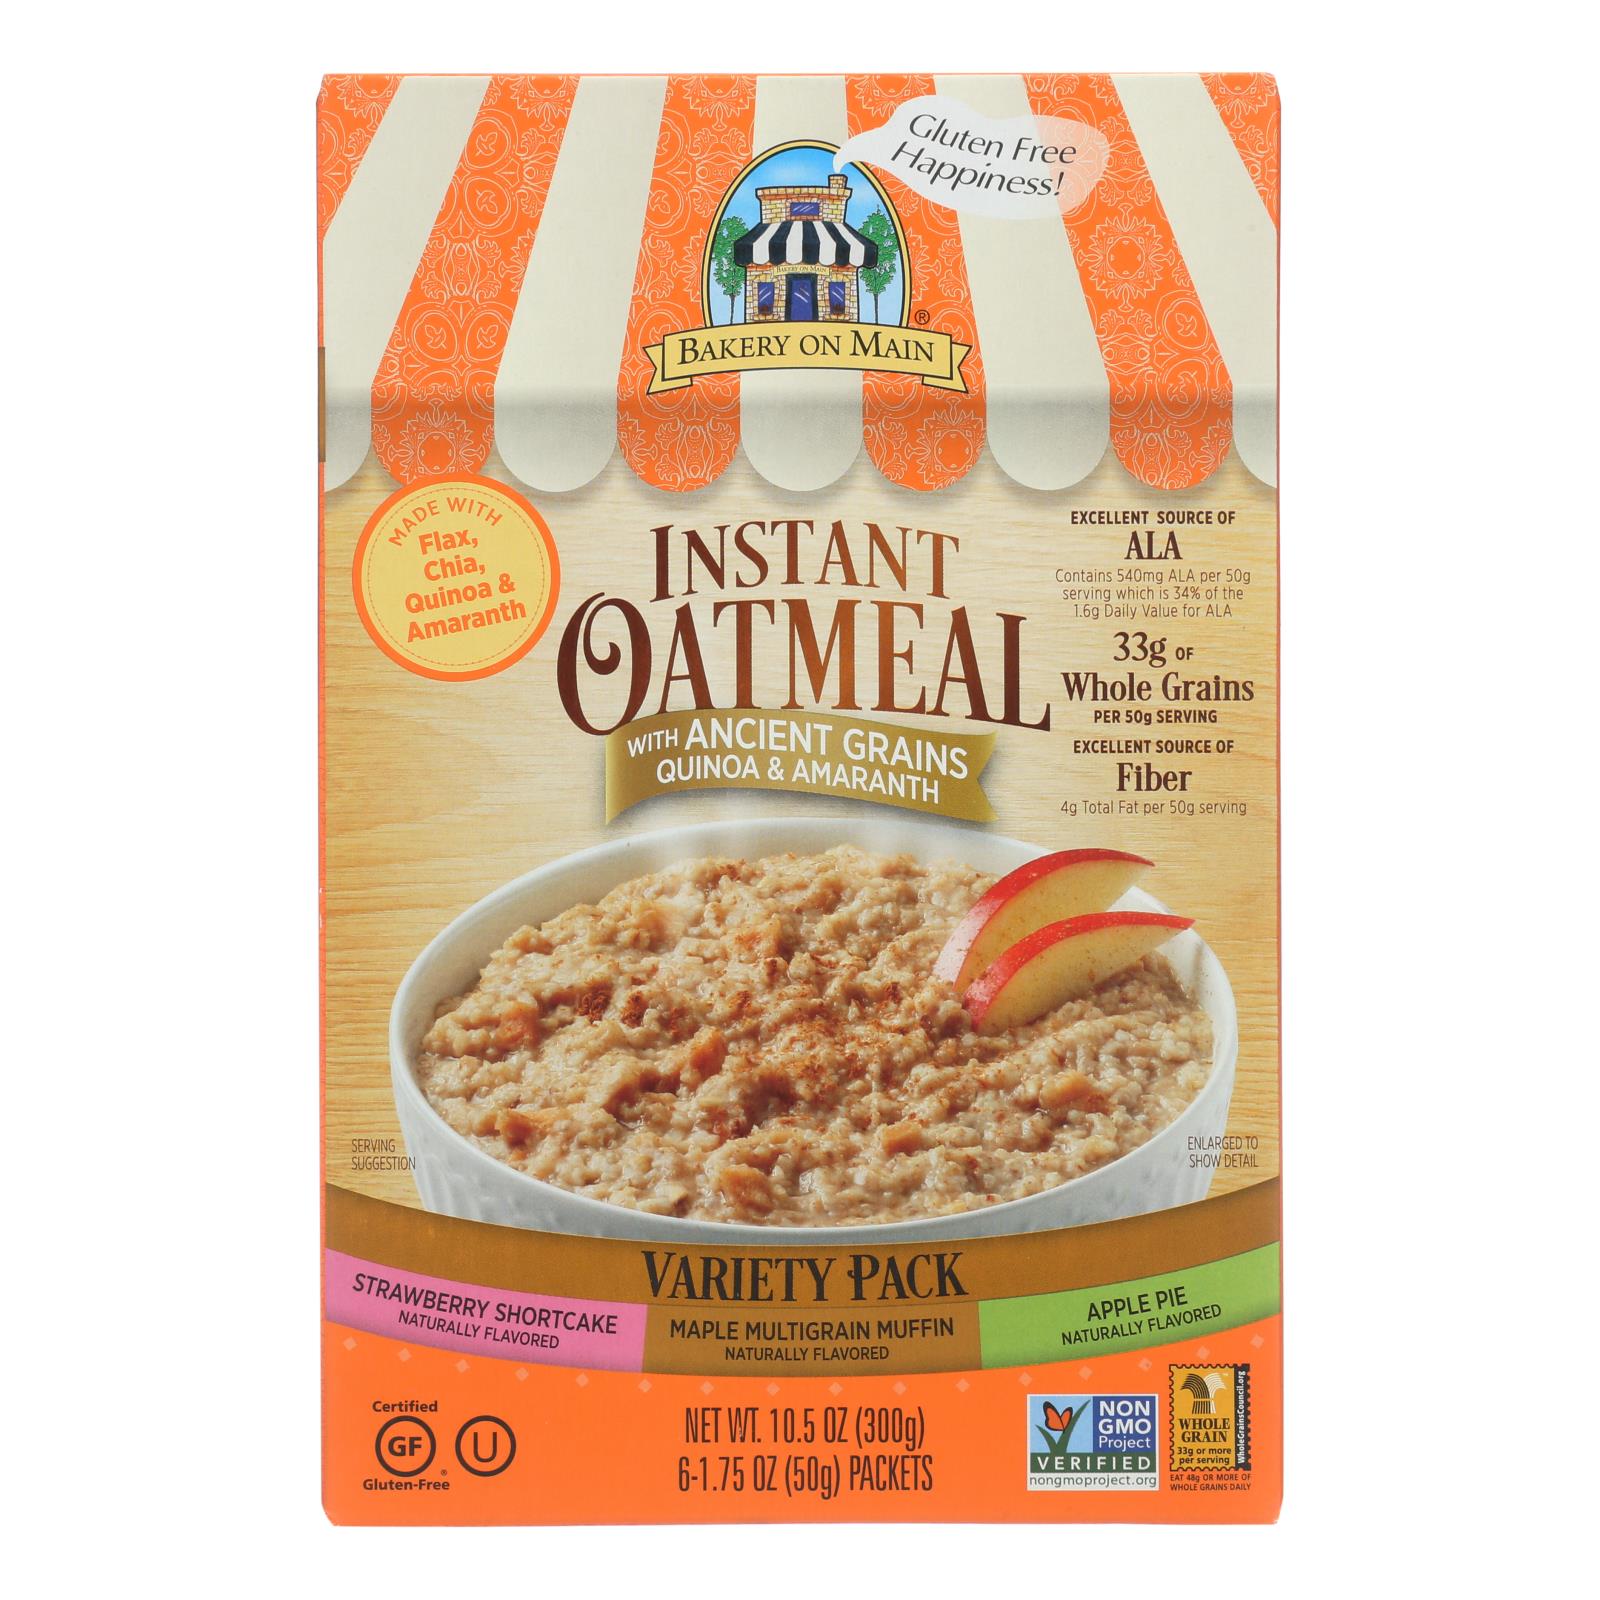 Bakery On Main, Bakery On Main Instant Oatmeal - Case of 6 - 10.5 oz. (Pack of 6)